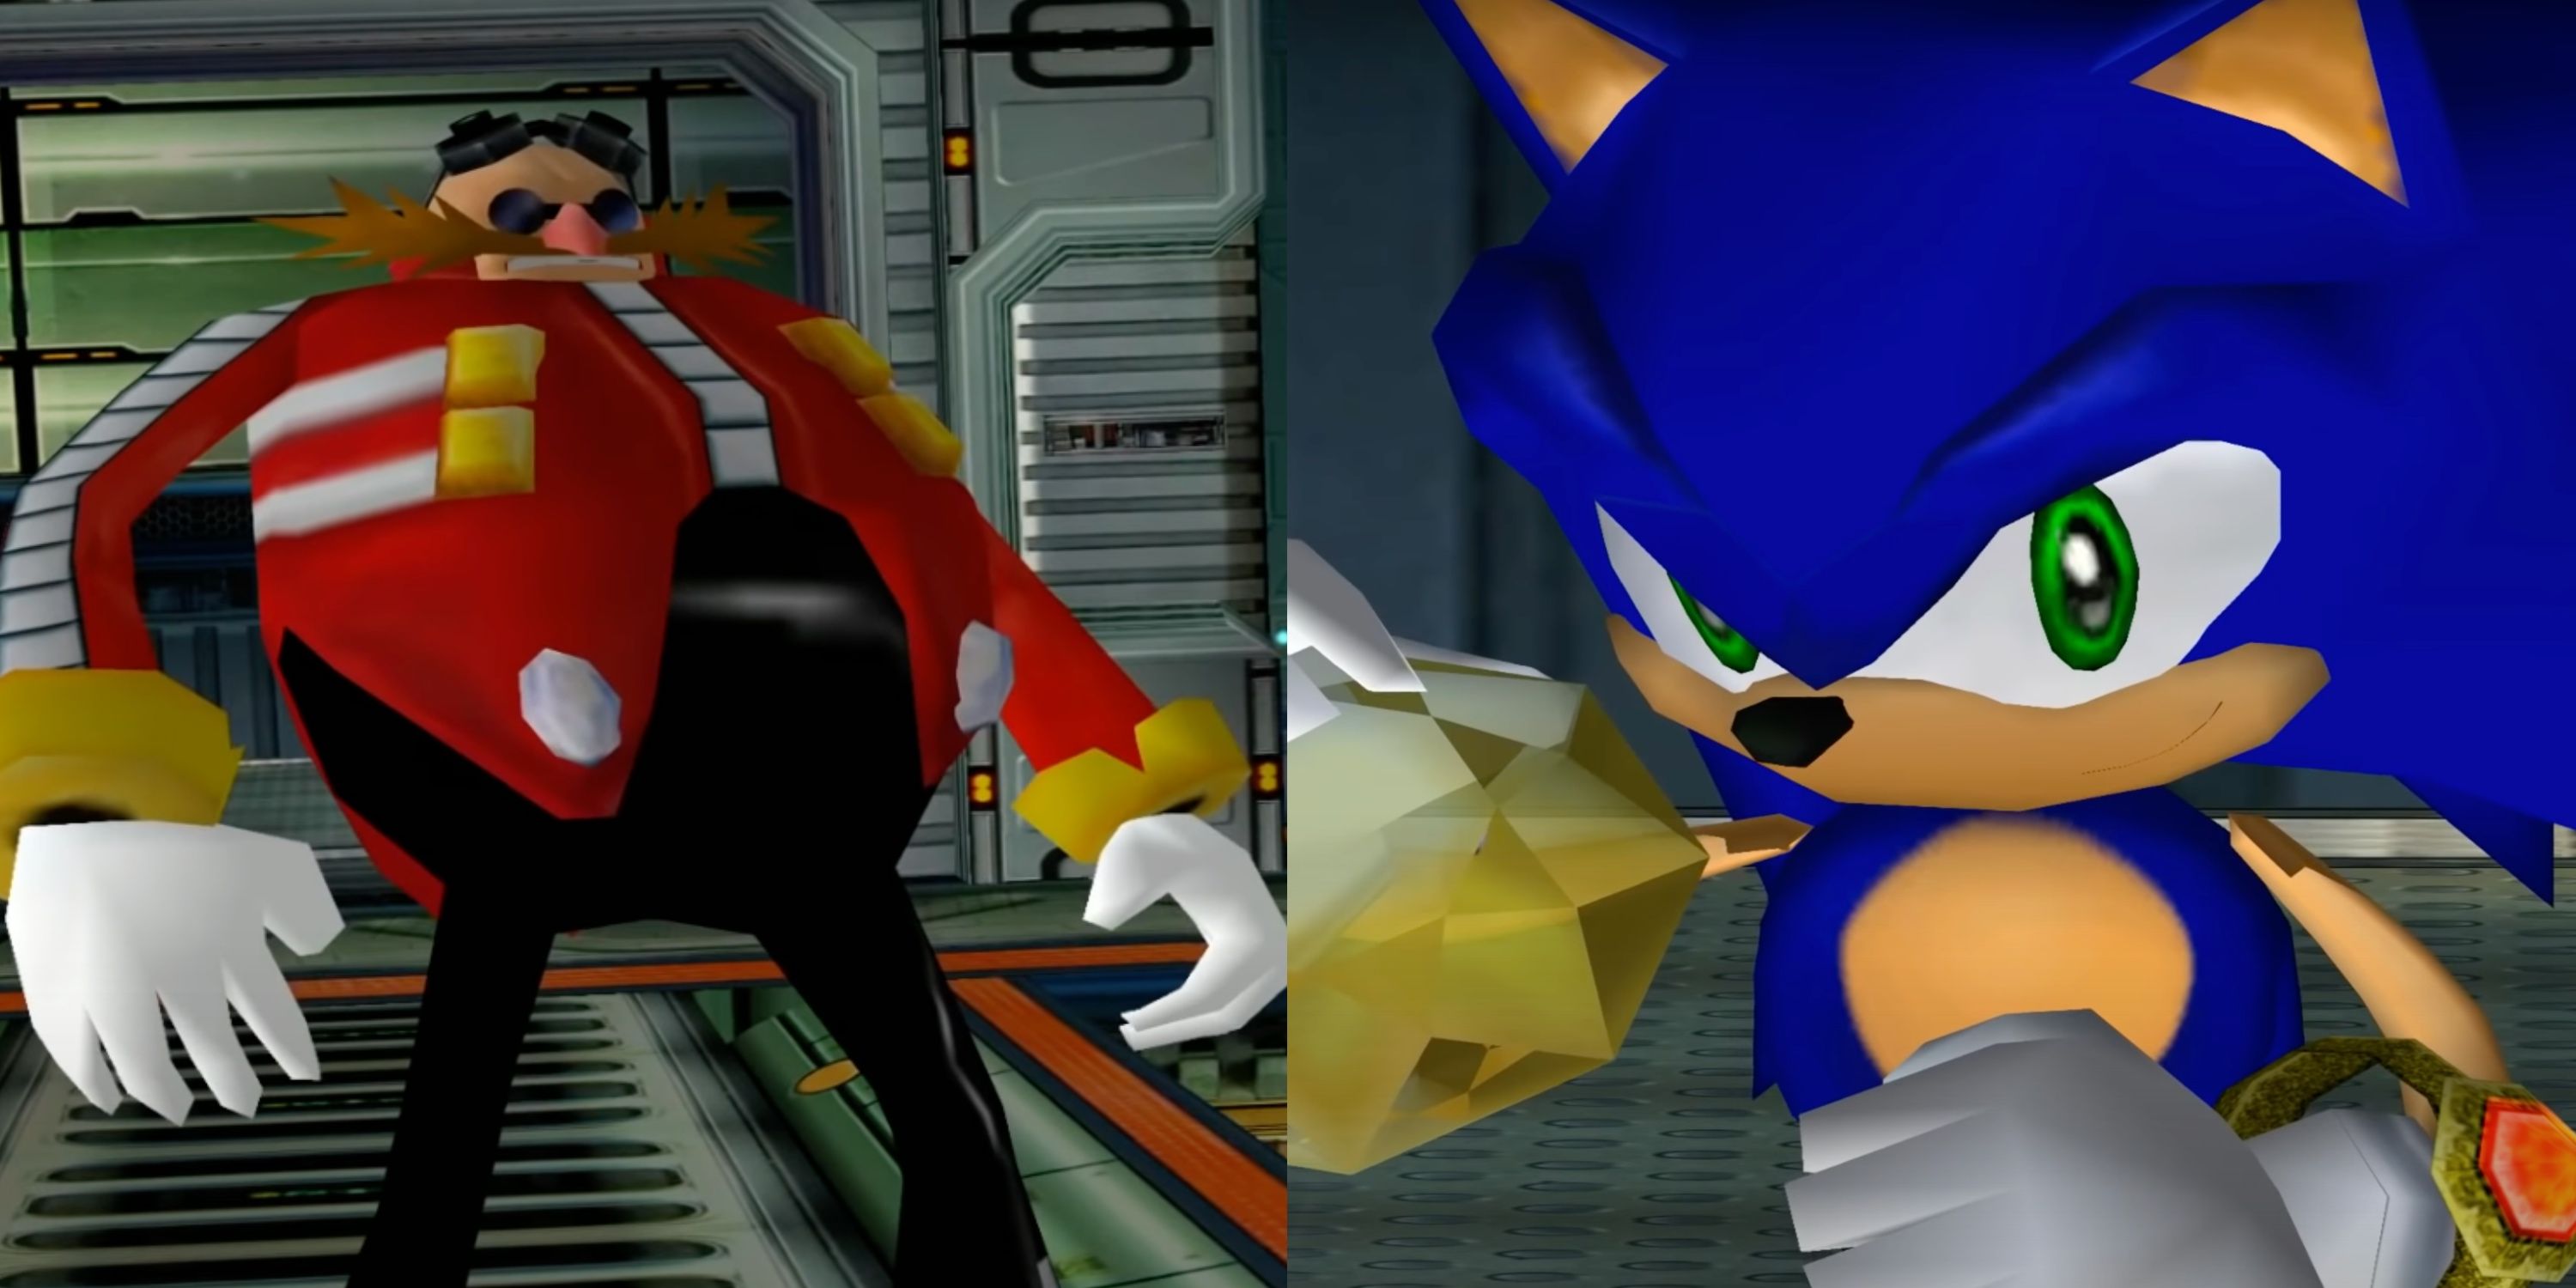 split image of eggman gritting his teeth and sonic holding a chaos emerald and smirking